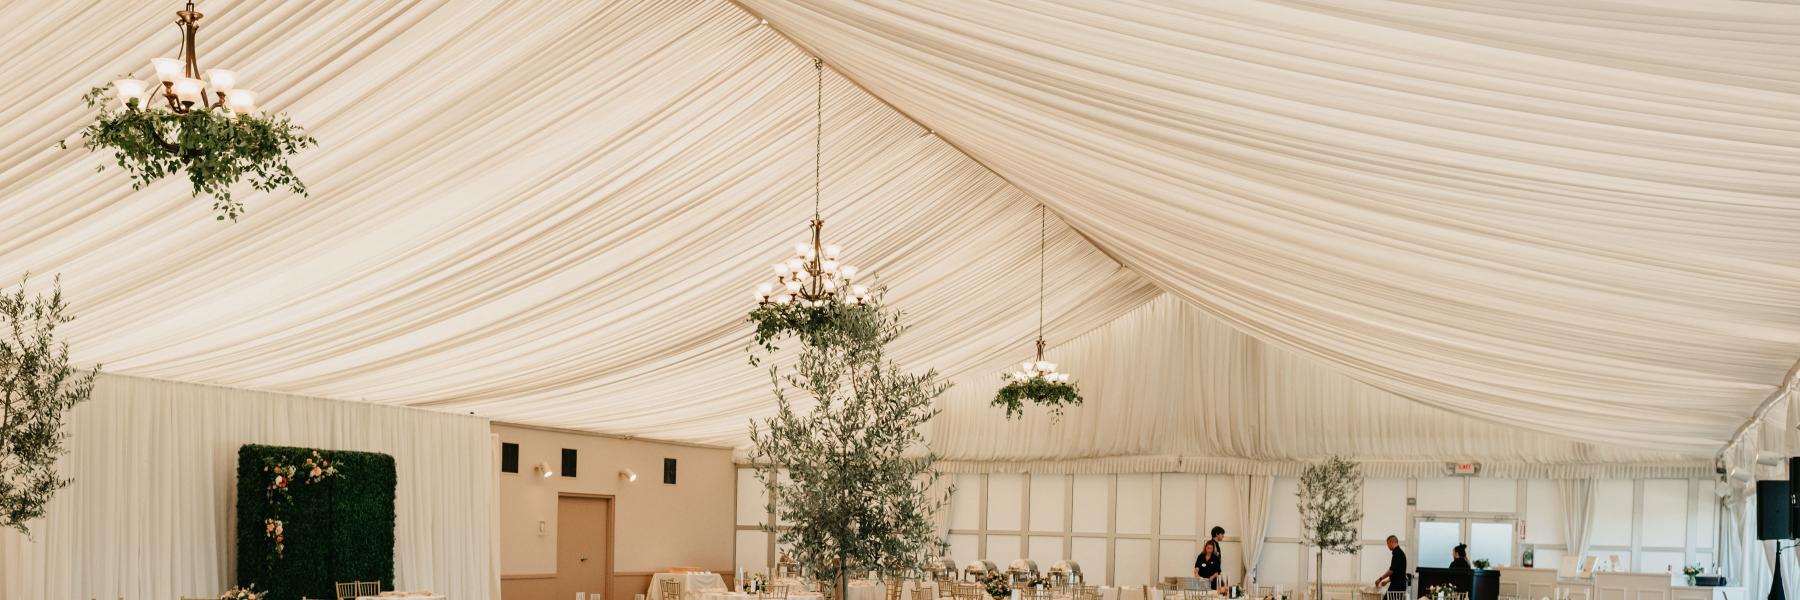 rose garden pavilion at Oregon Golf Club with greenery chandeliers